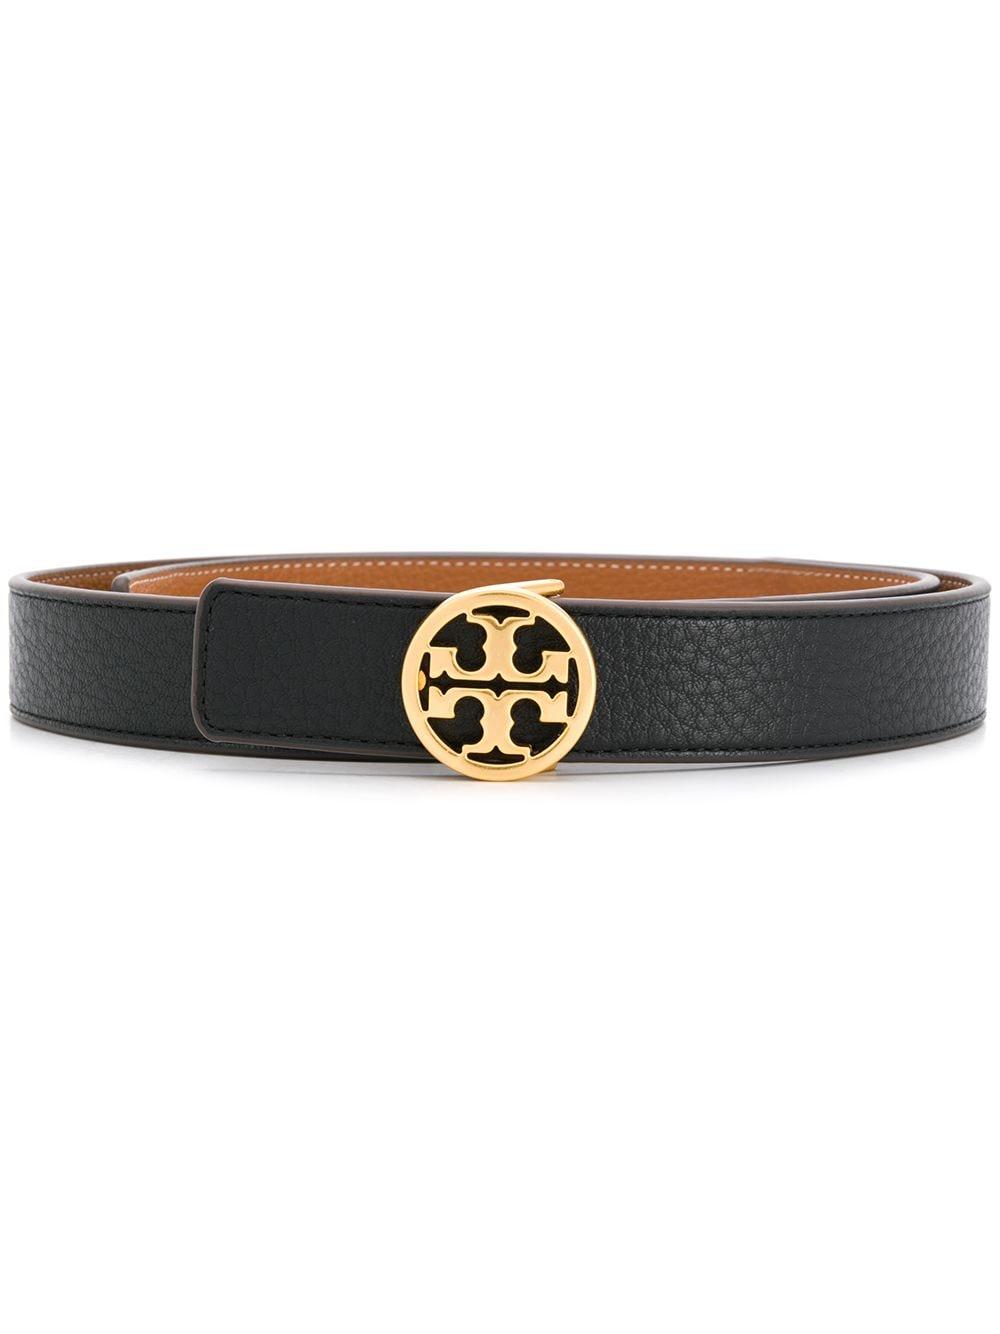 Tory Burch Reversible Logo Leather Belt in Black - Save 39% | Lyst